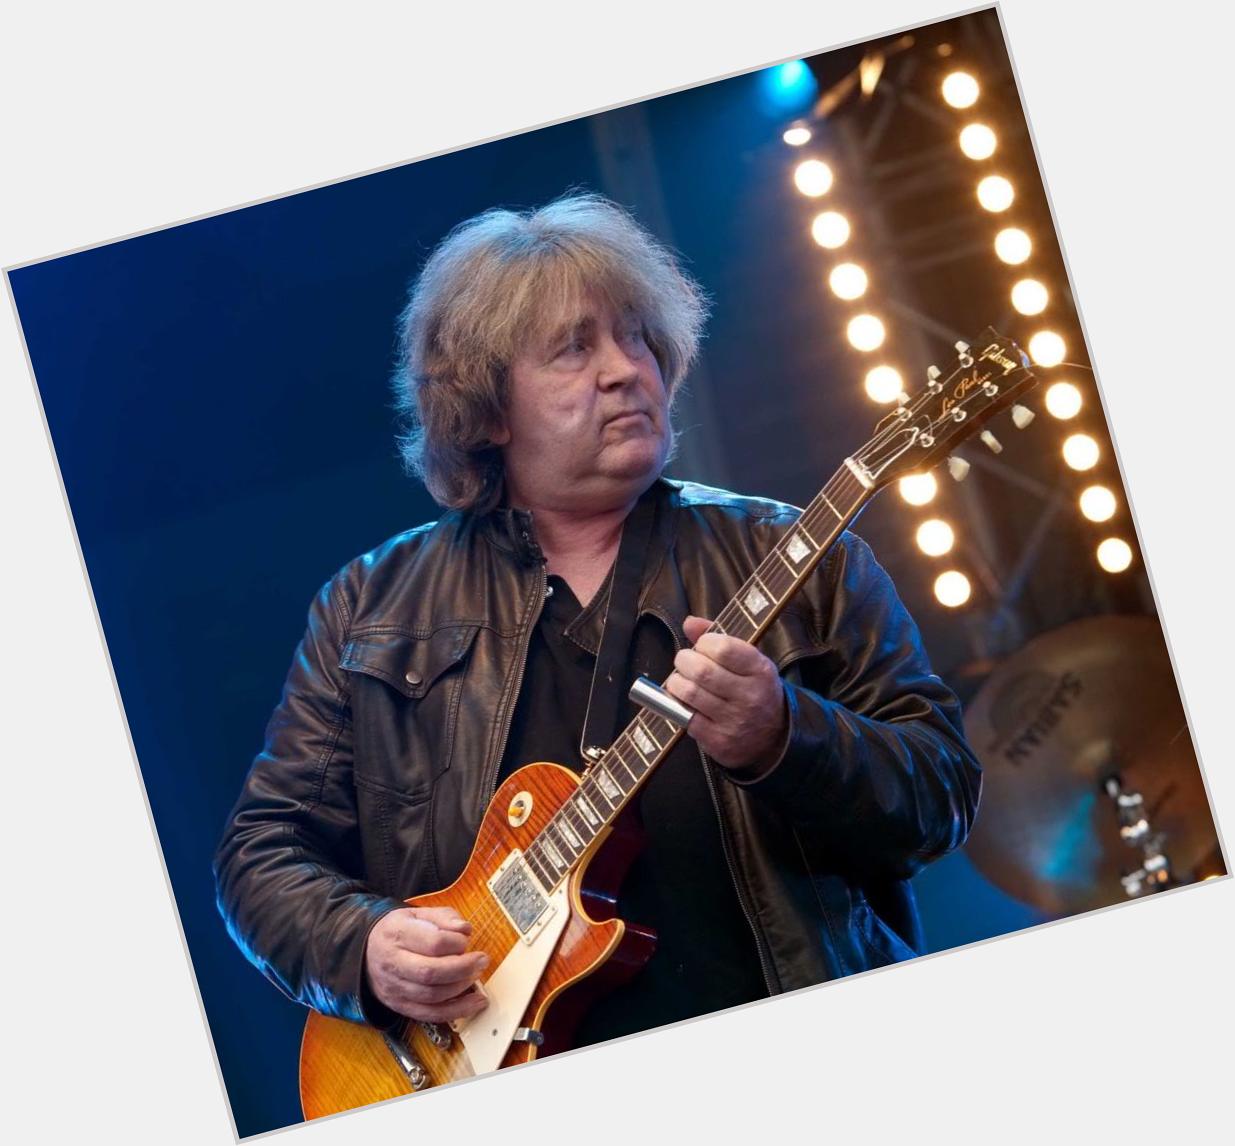  Happy birthday to Mick Taylor, 66 today :-) 